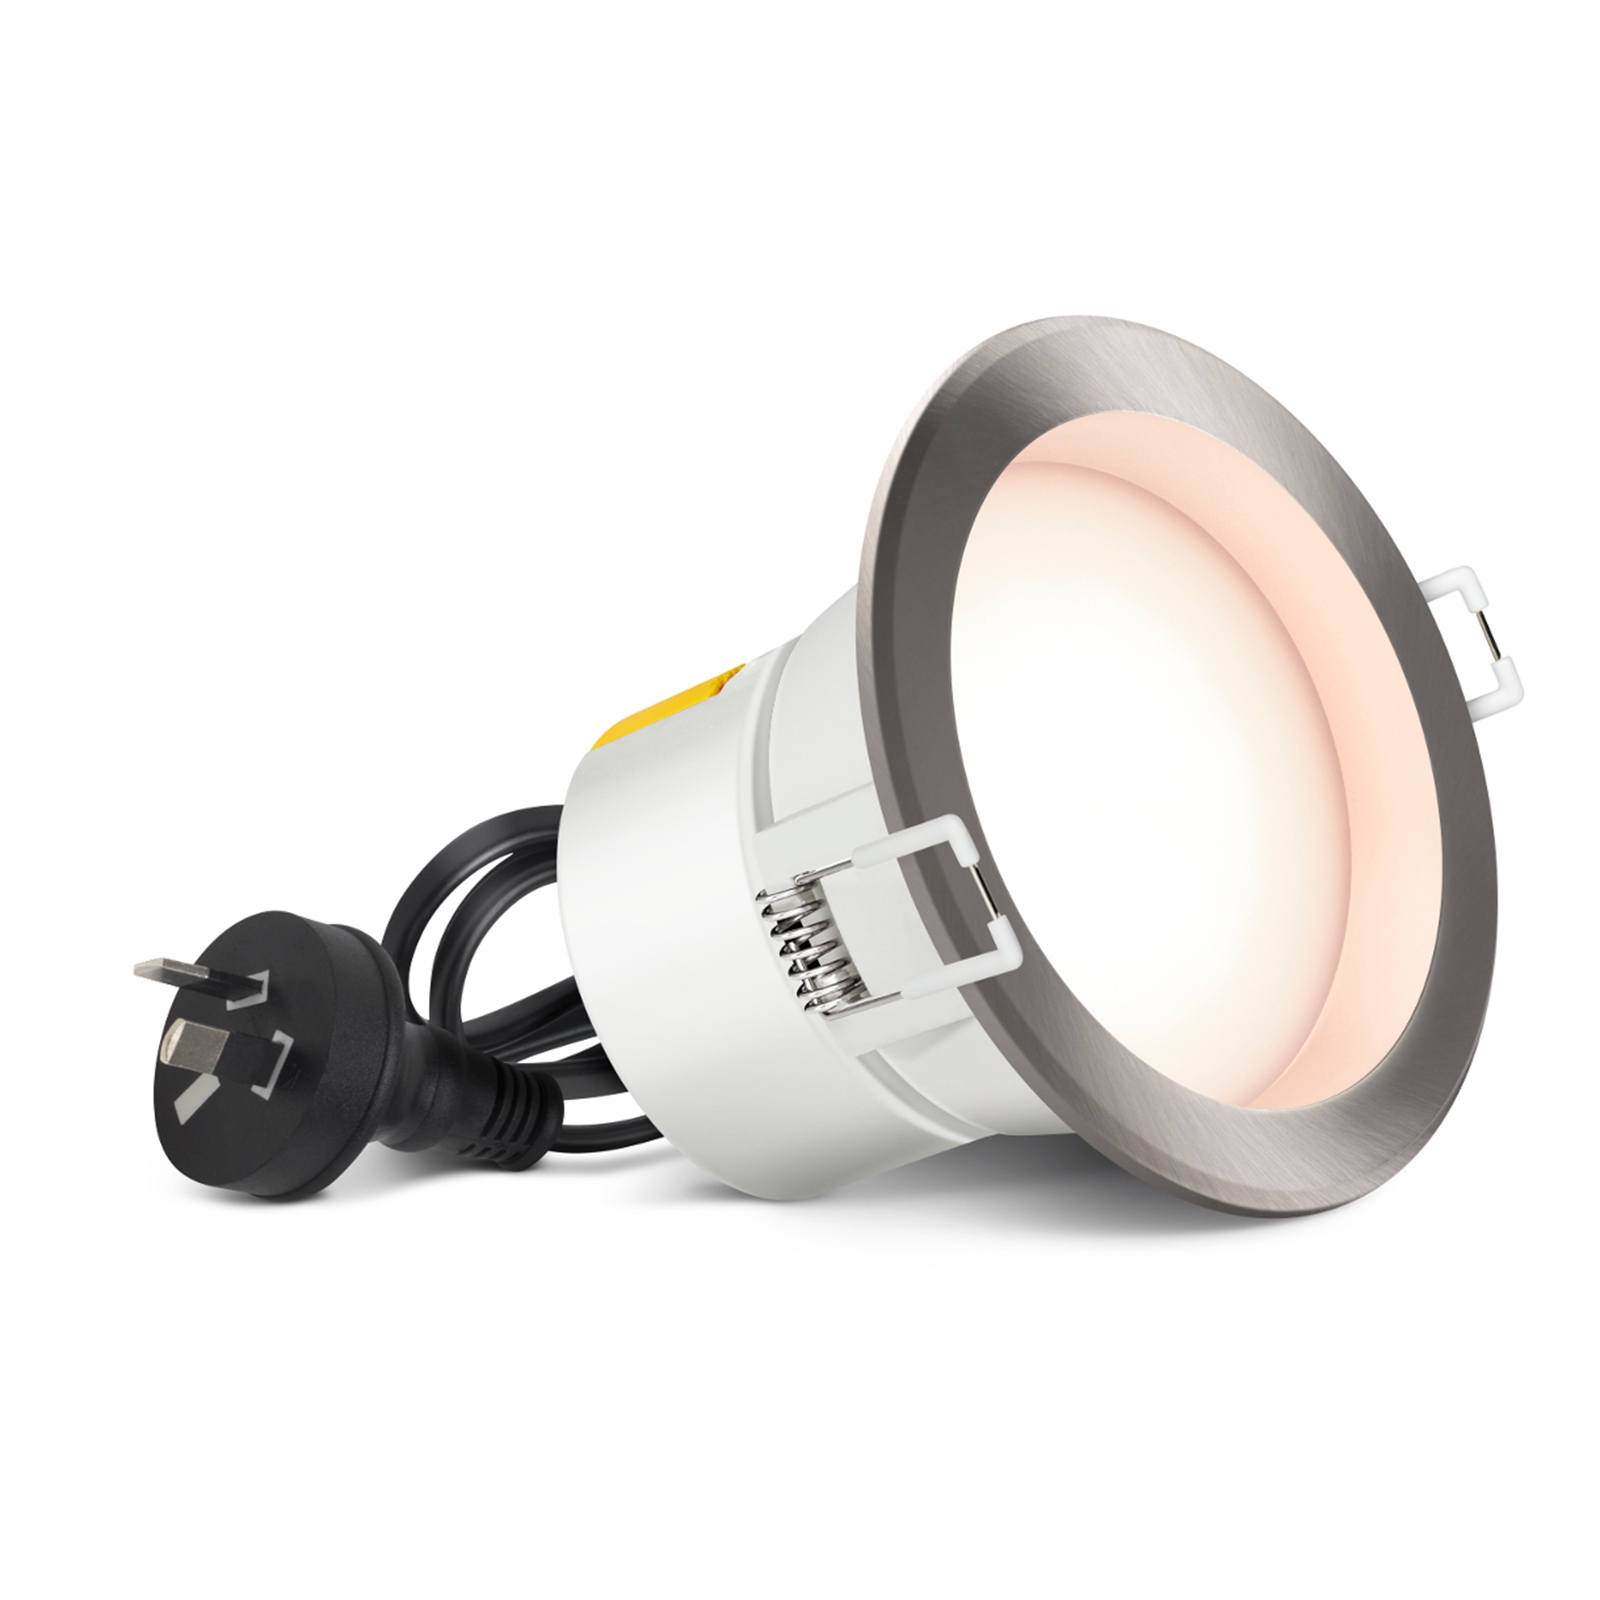 HPM 12V 7W Cool White Dimmable LED Downlight